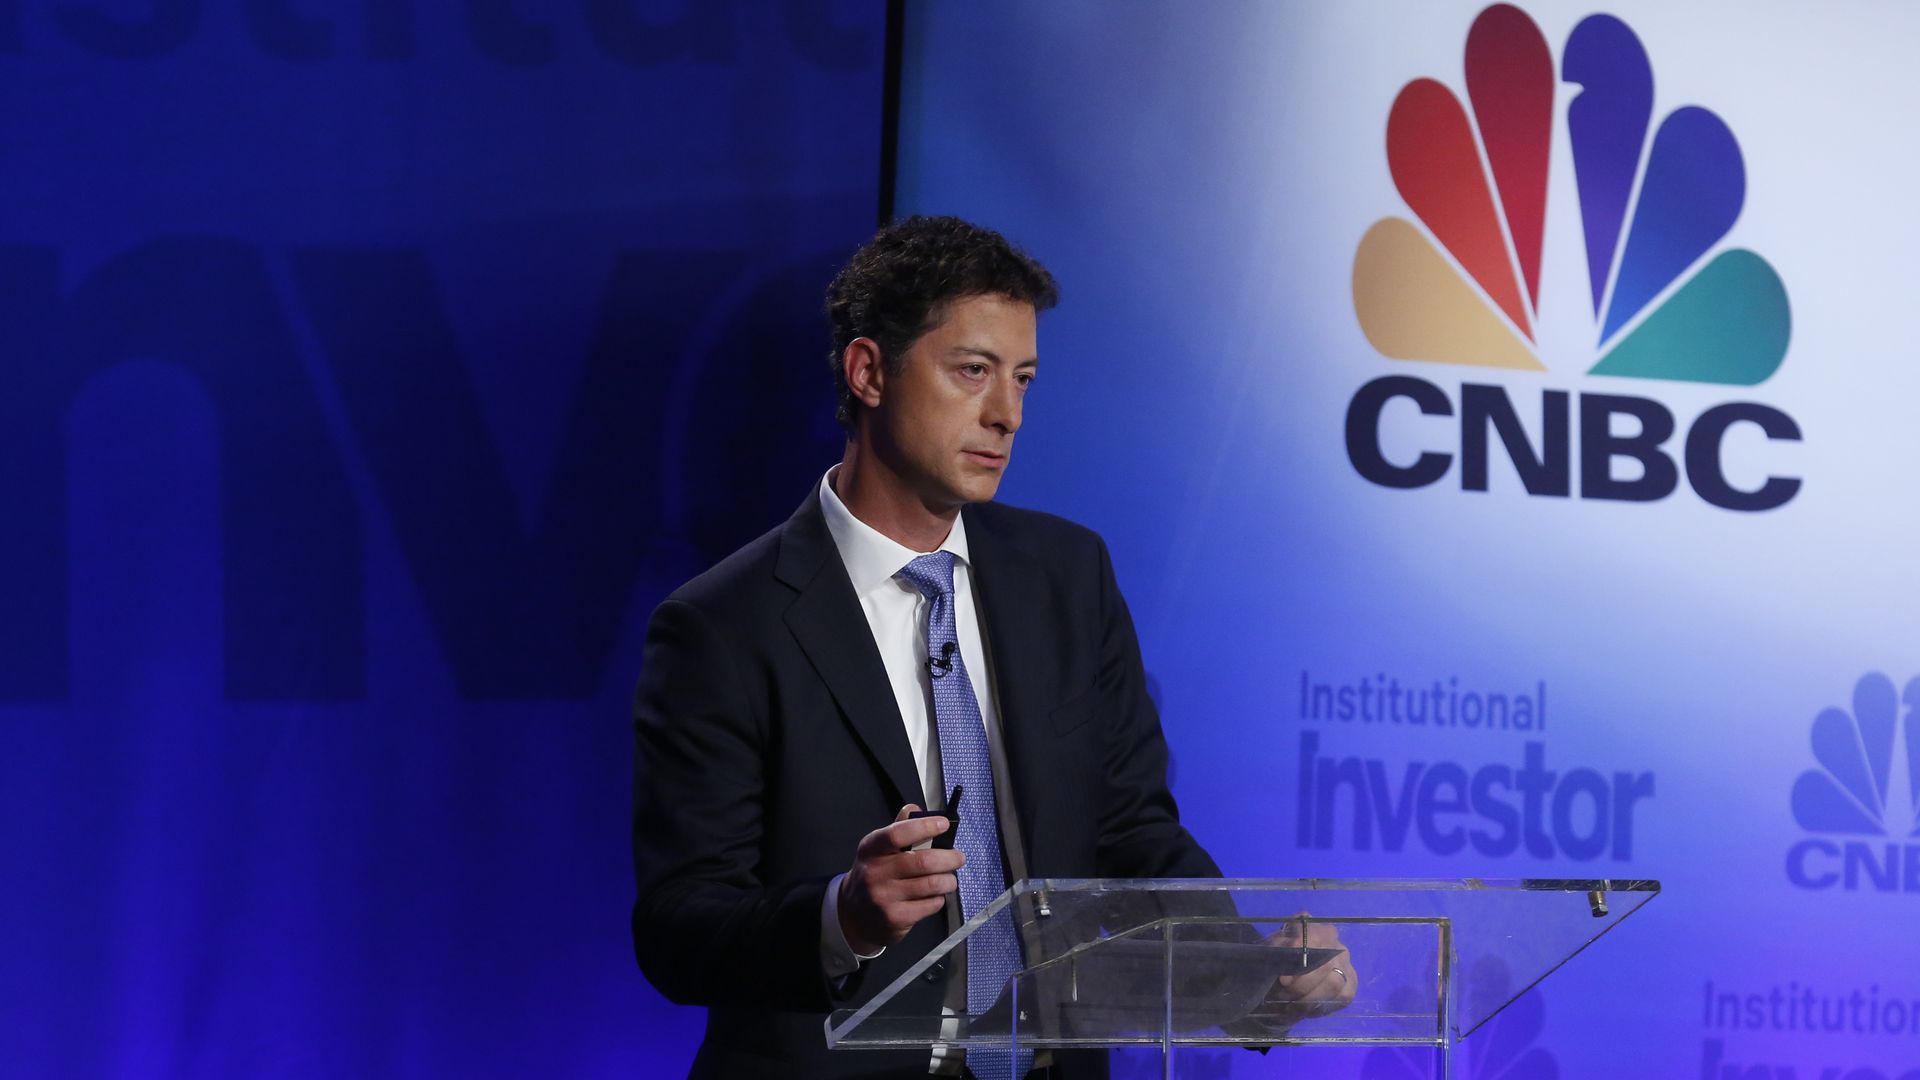 Jeffrey Smith, CEO of Starboard Value LP, speaks at the 5th annual CNBC Institutional Investor Delivering Alpha Conference on Wednesday, July 15, 2015.